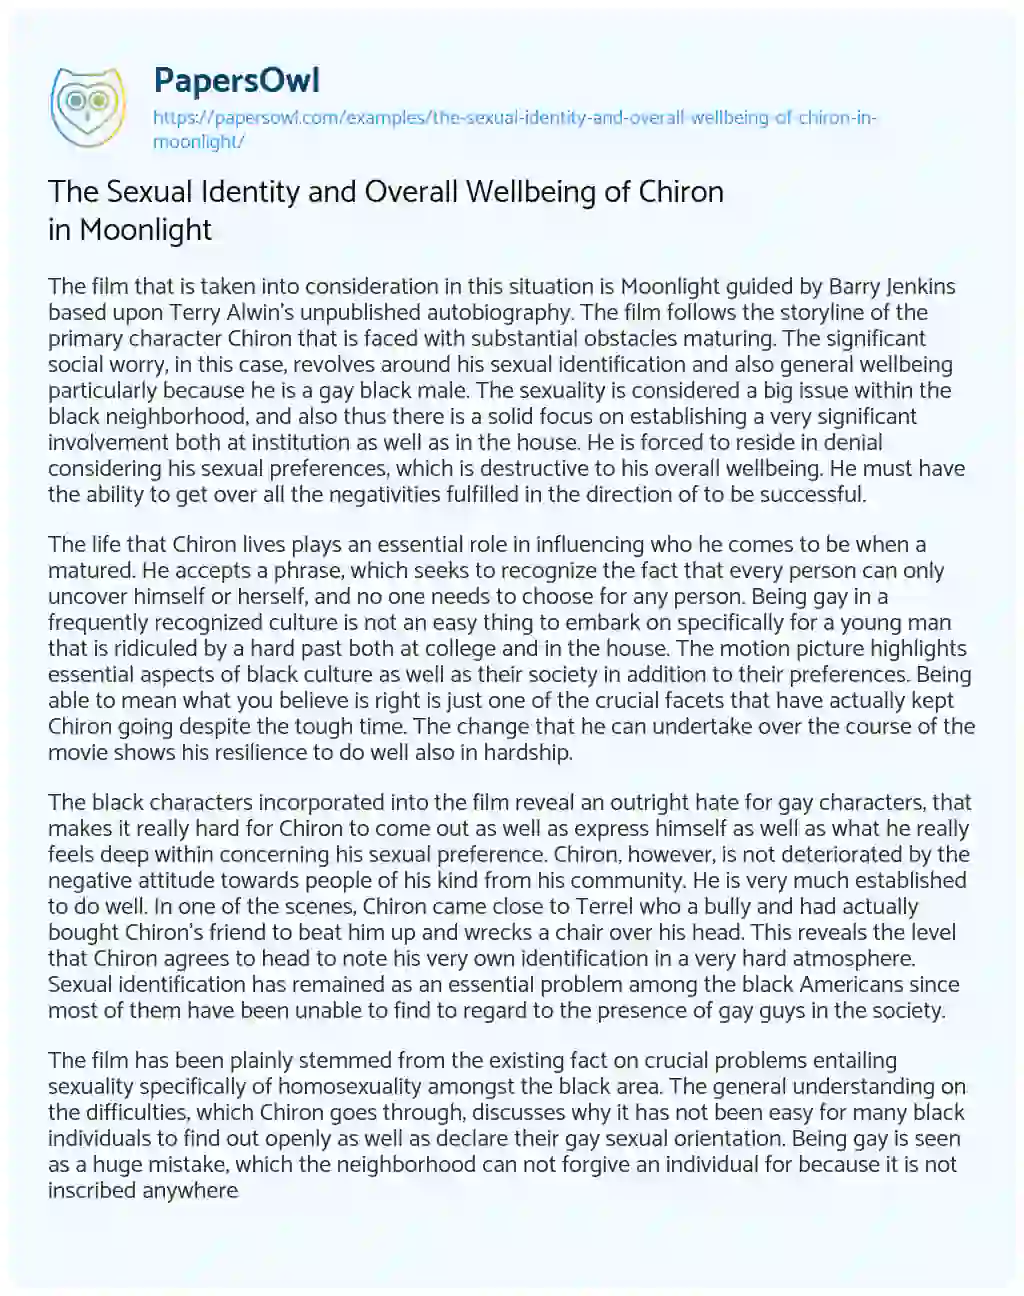 Essay on The Sexual Identity and Overall Wellbeing of Chiron in Moonlight